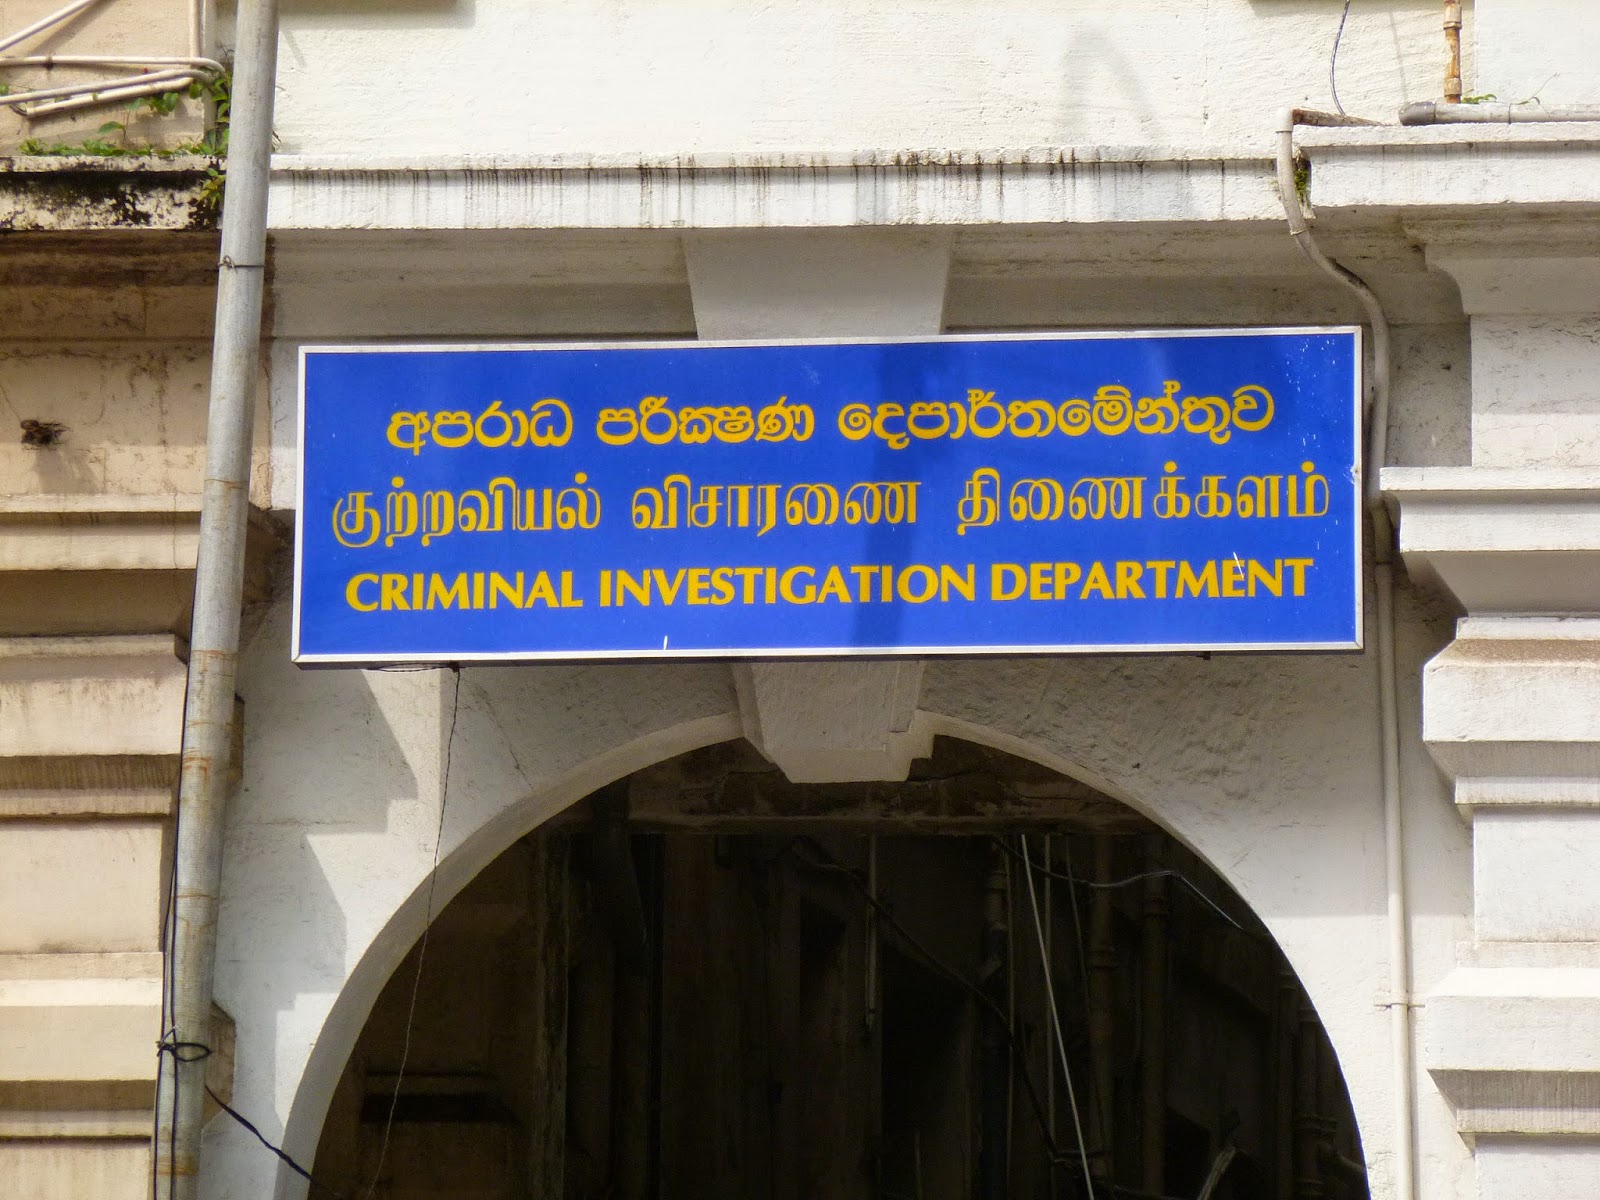 Complaint lodged with CID on vehicles imported during previous government